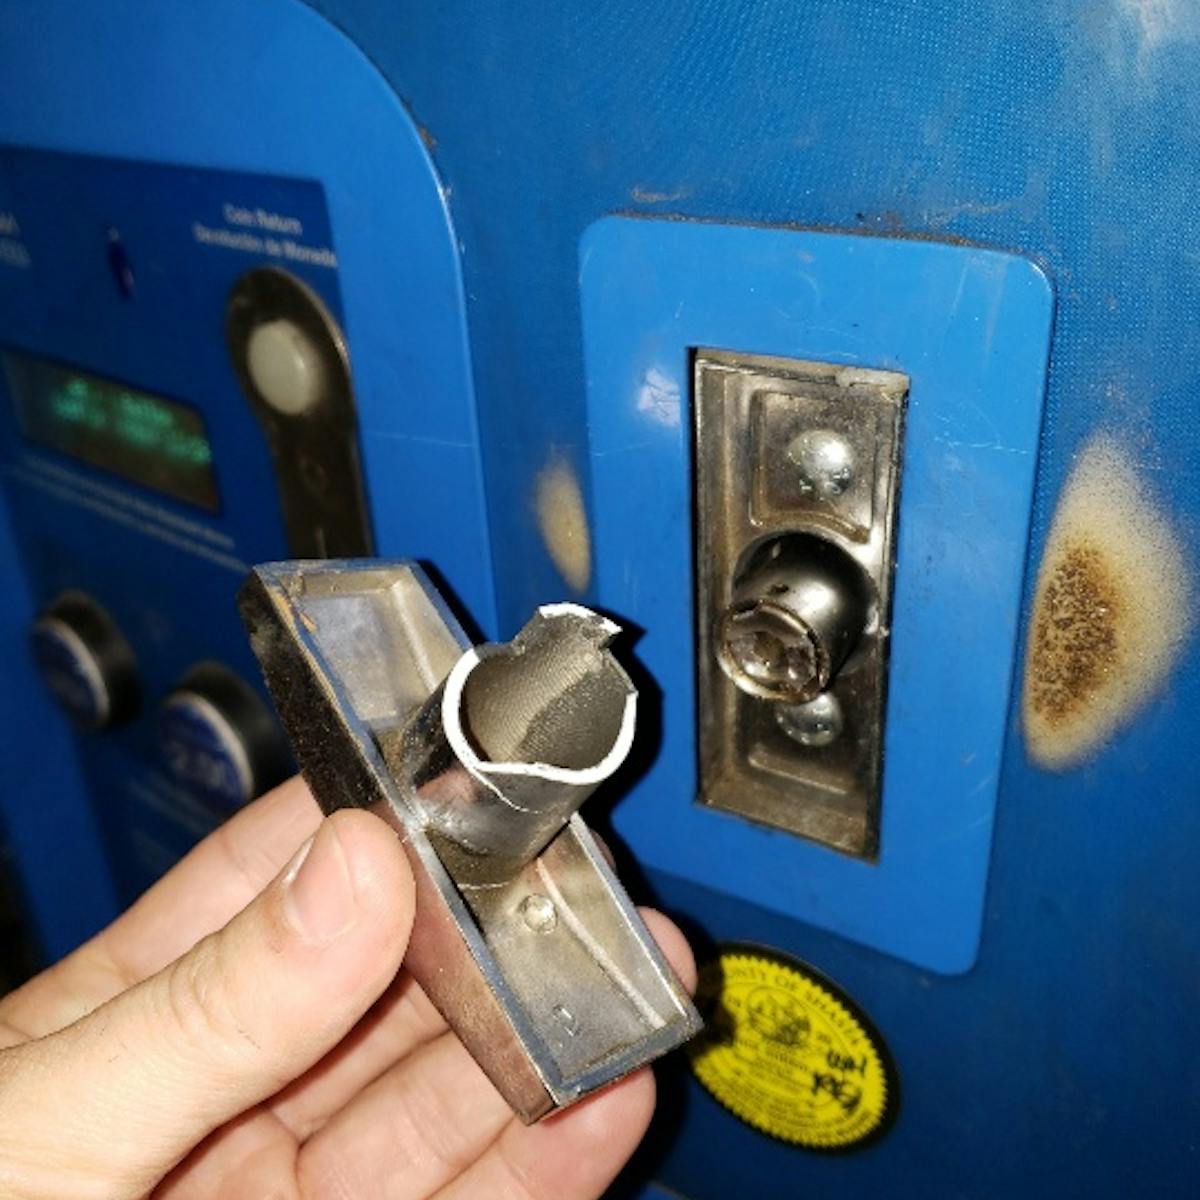 Primo Water Corporation reported that beginning on November 13, 2019, they experienced theft and/or vandalism to 75 purified water vending machines they owned, according to a Redding Police Department press release issued Dec. 27.